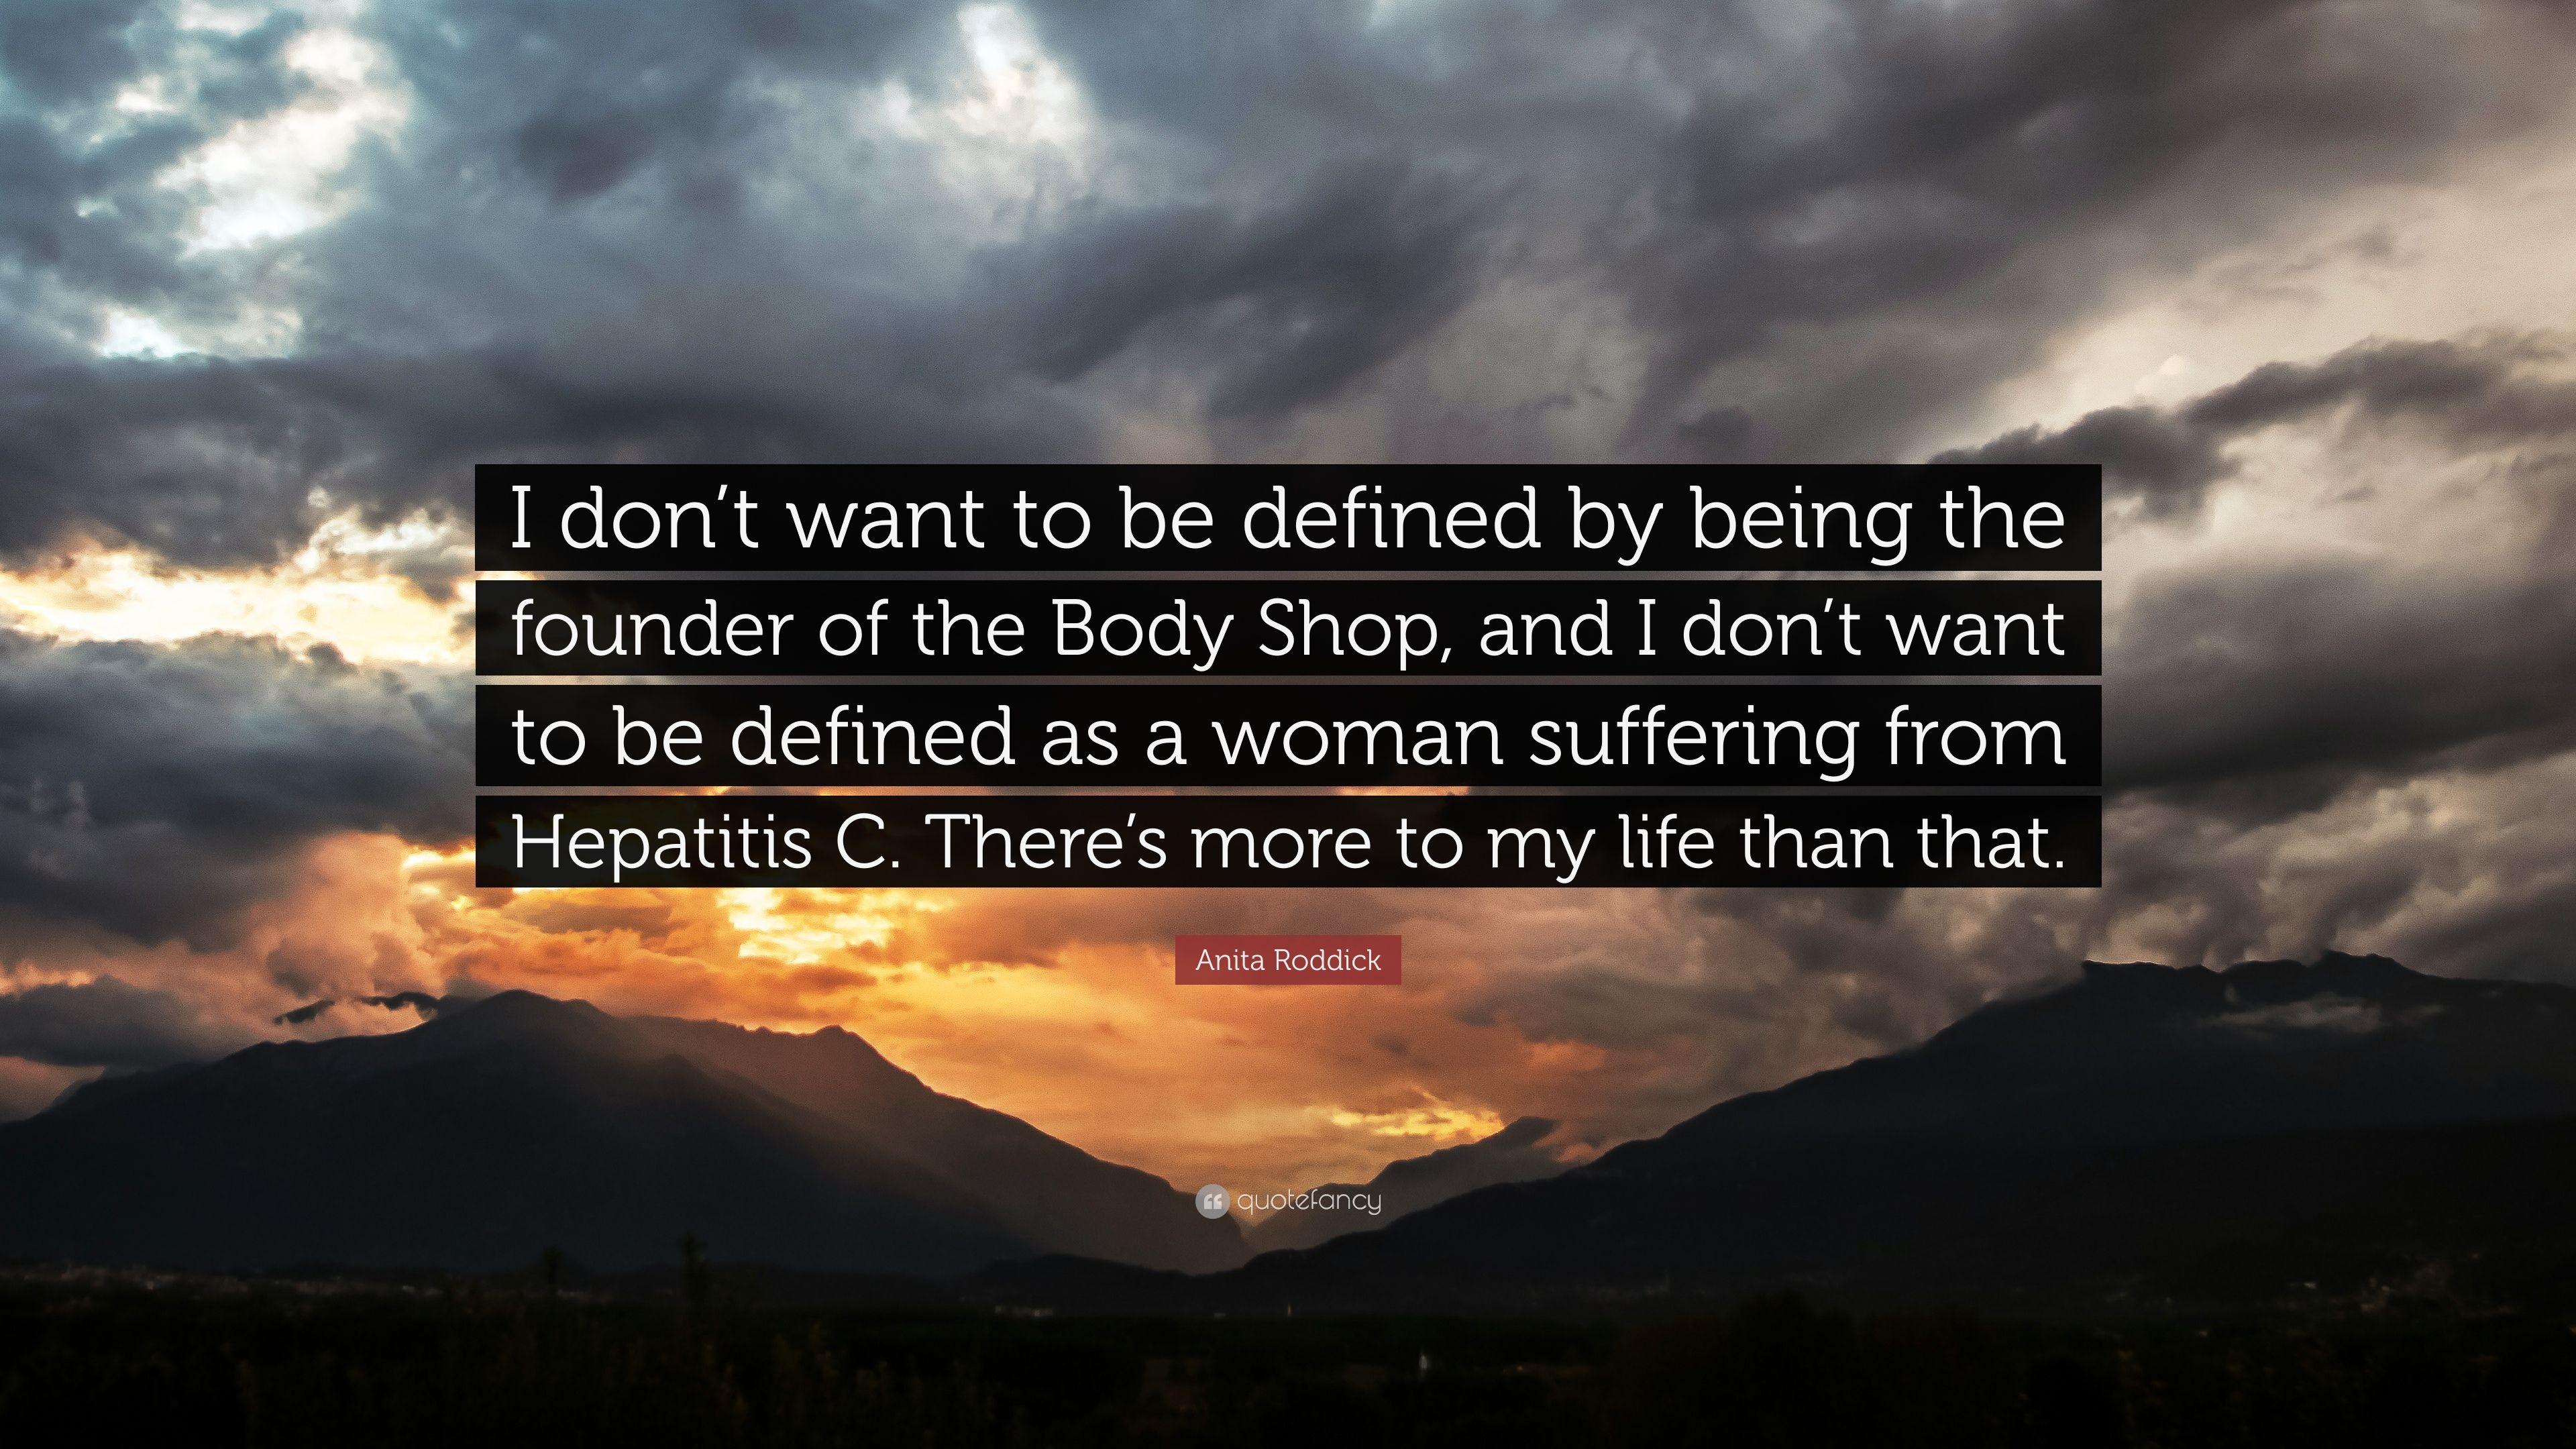 Anita Roddick Quote: “I don't want to be defined